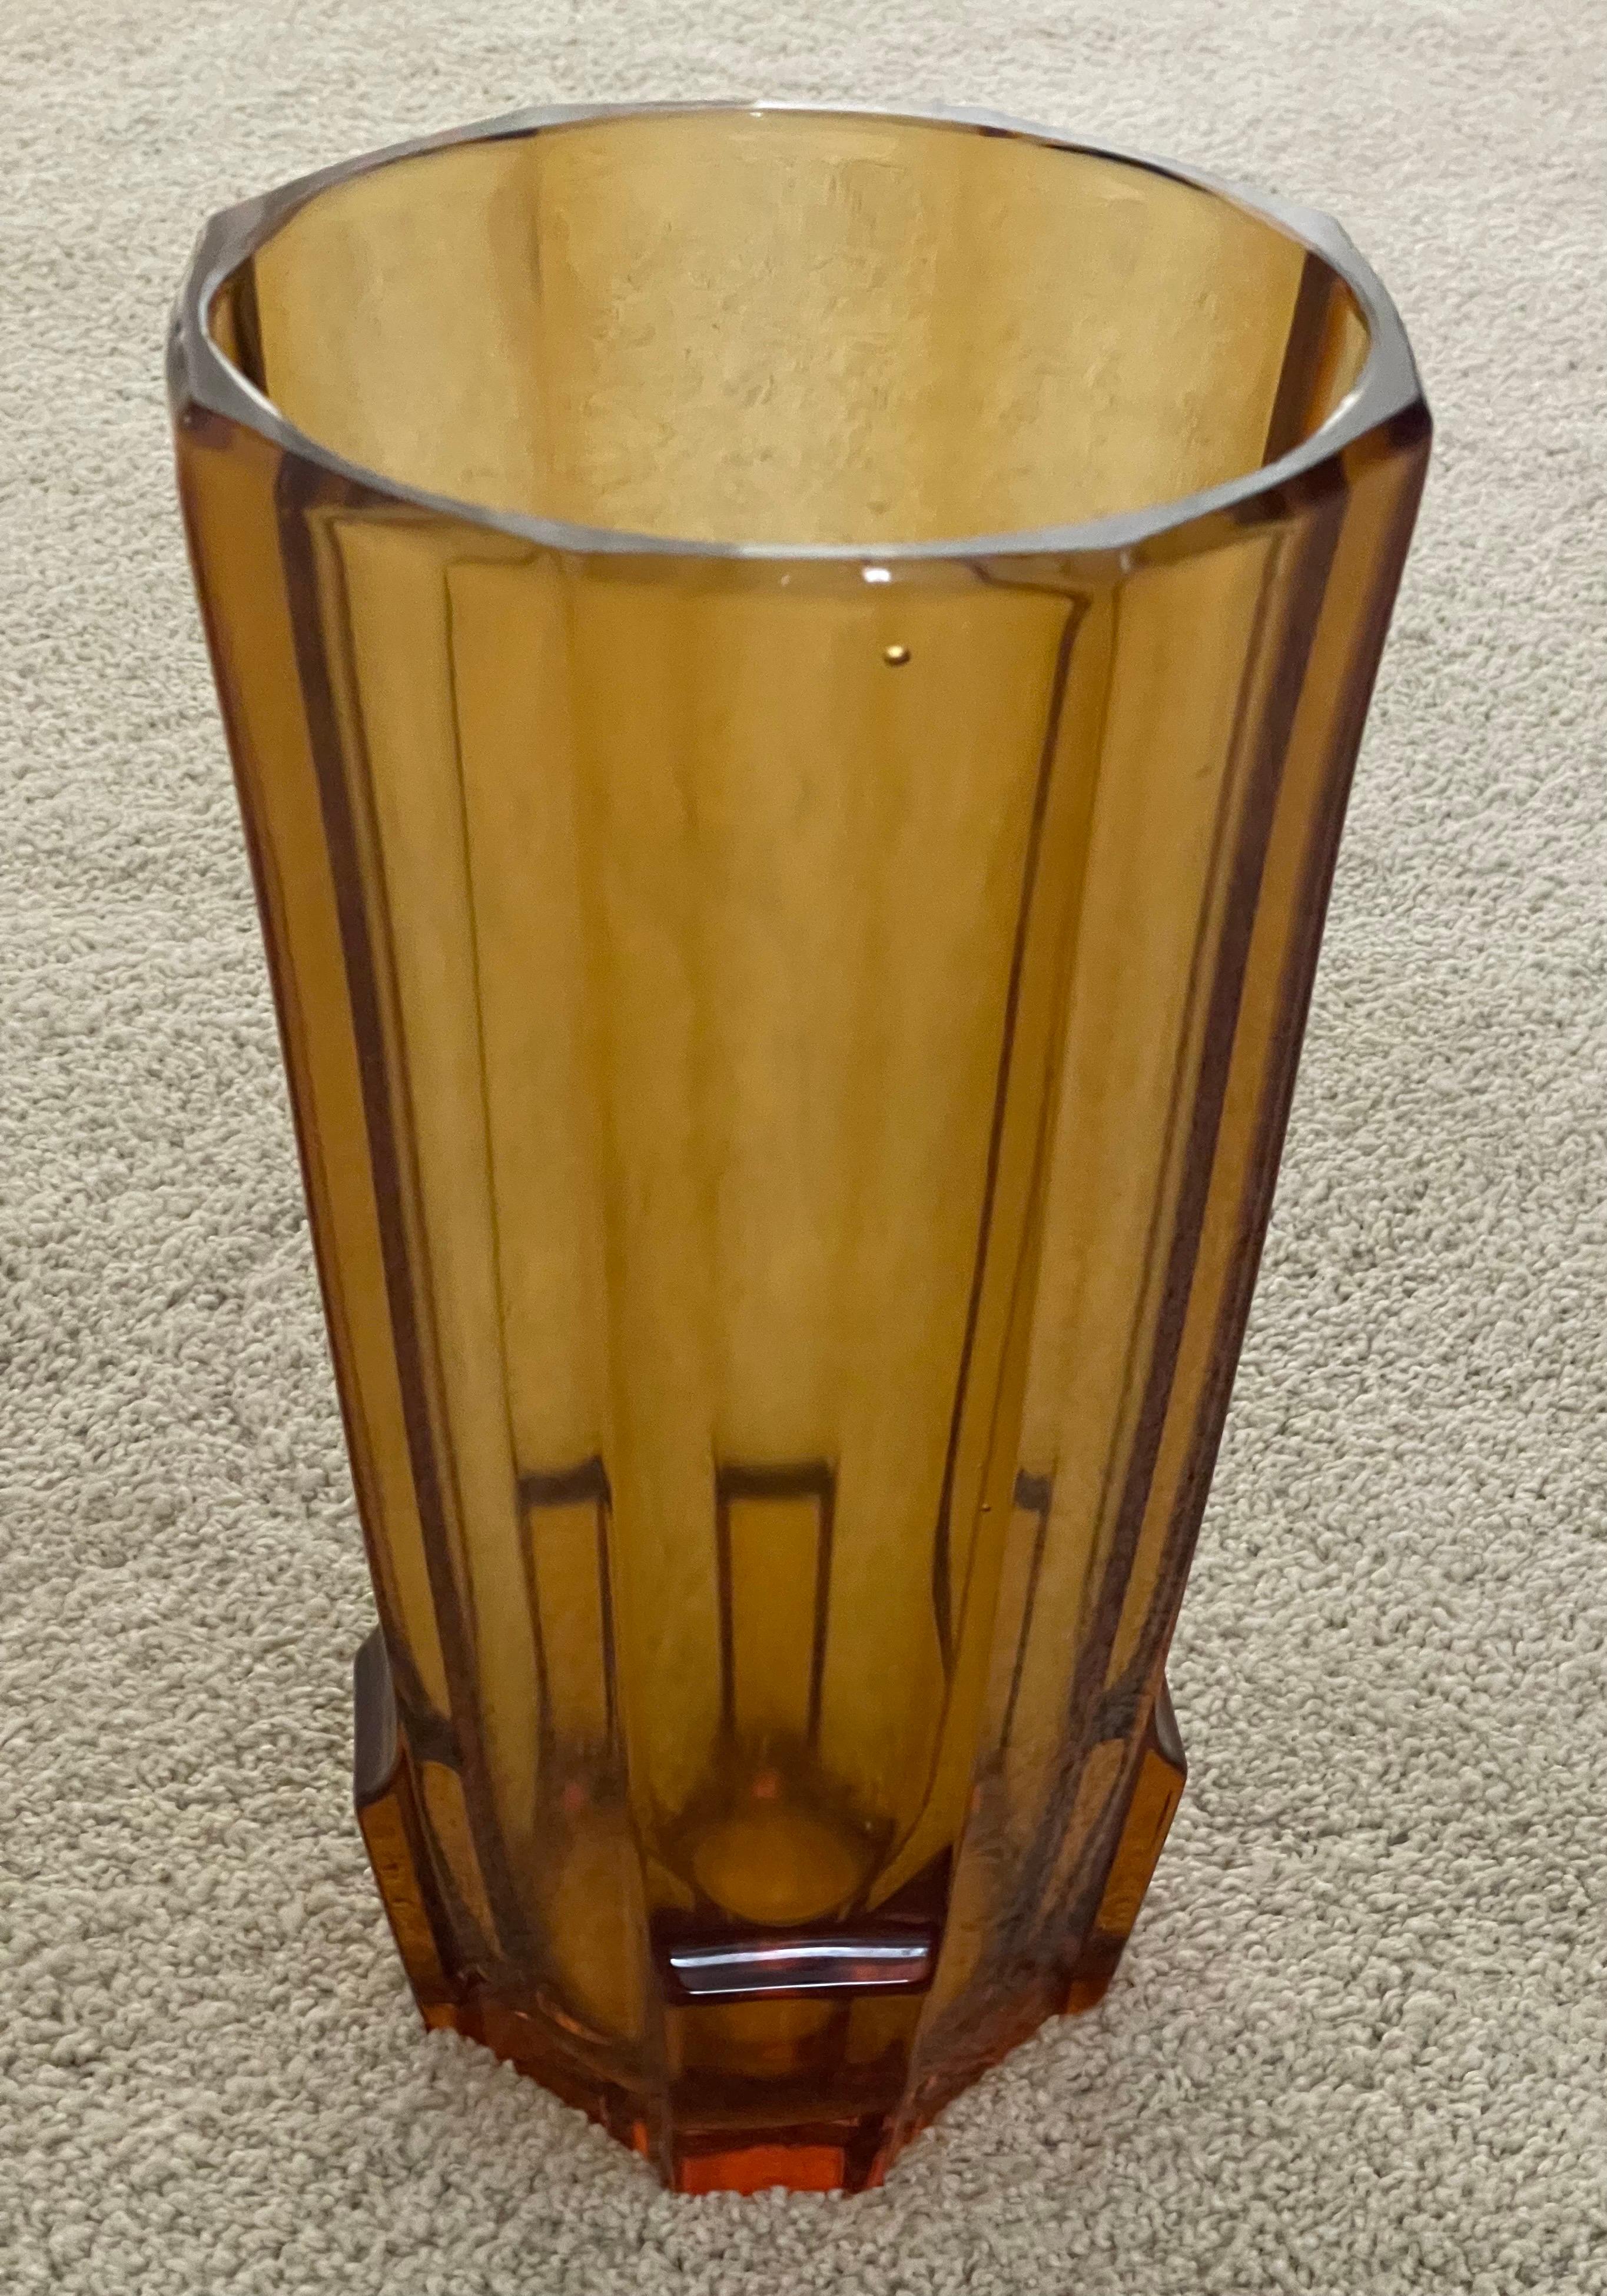 Large Art Deco Art Glass Faceted Vase by Josef Hoffmann for Moser Glassworks In Good Condition For Sale In San Diego, CA